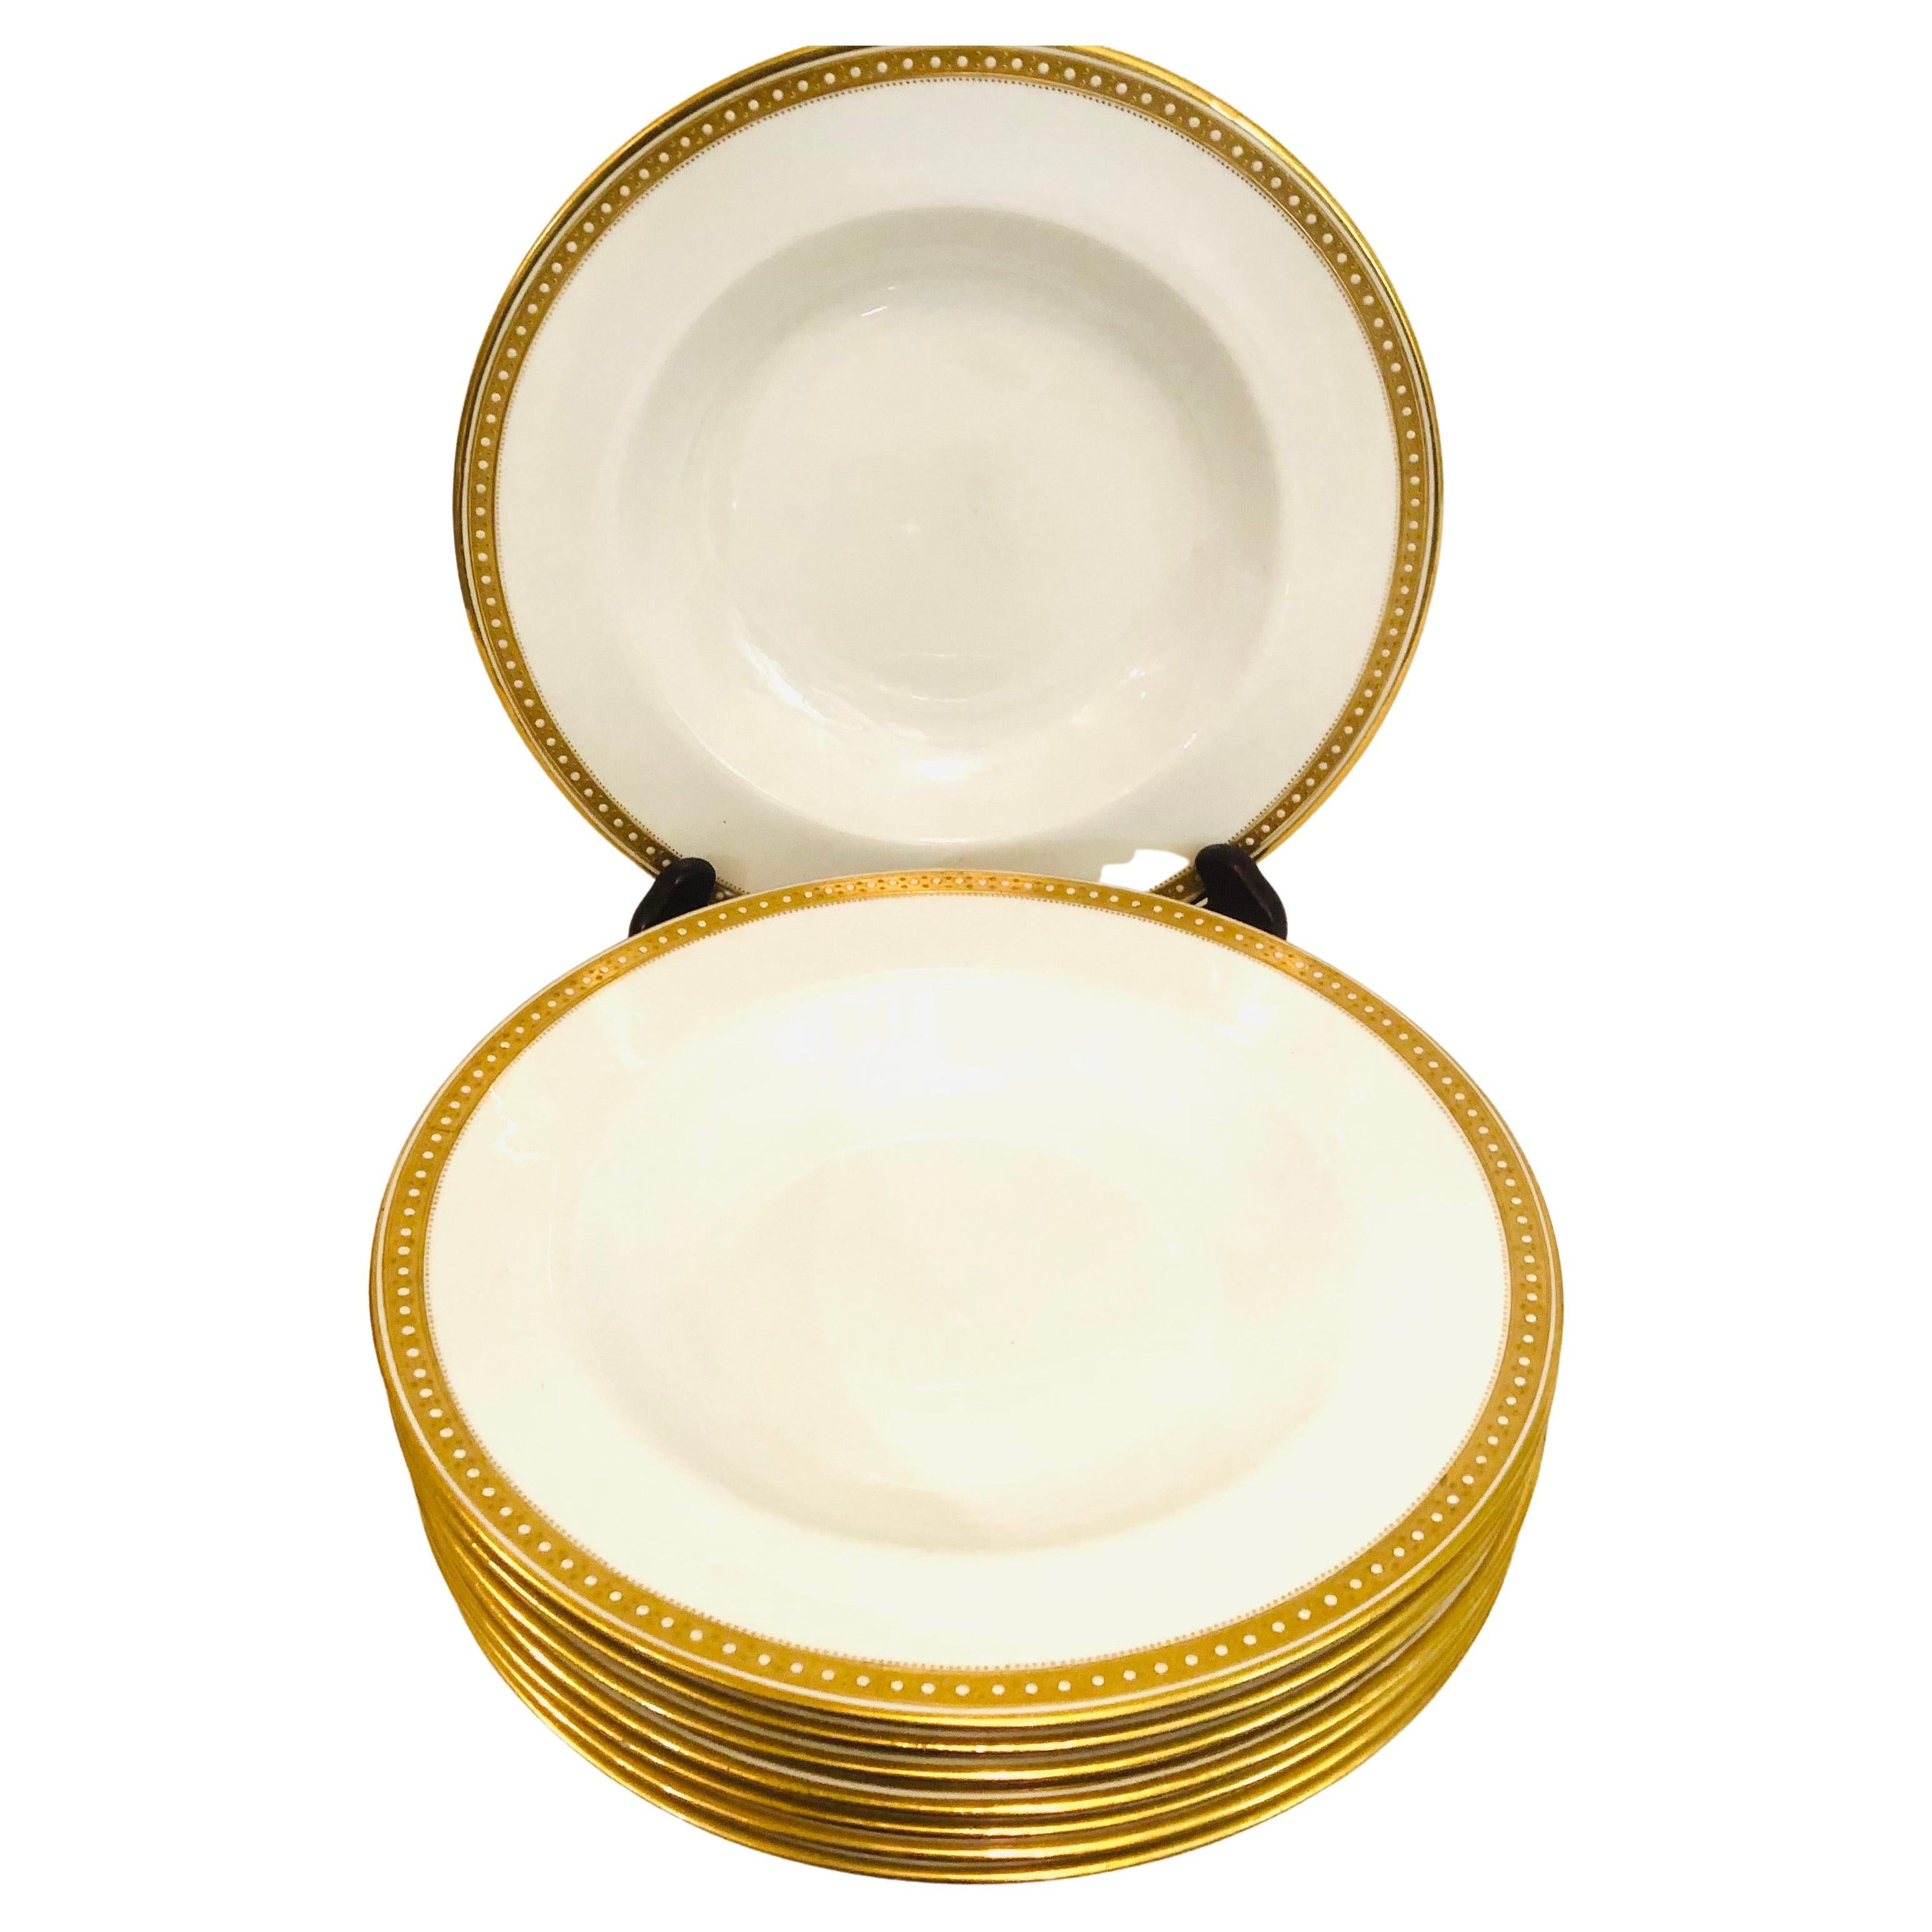 Neoclassical 16 Copeland Spode Wide Rim Soups Made for T. Goode with Gold Border & Jeweling